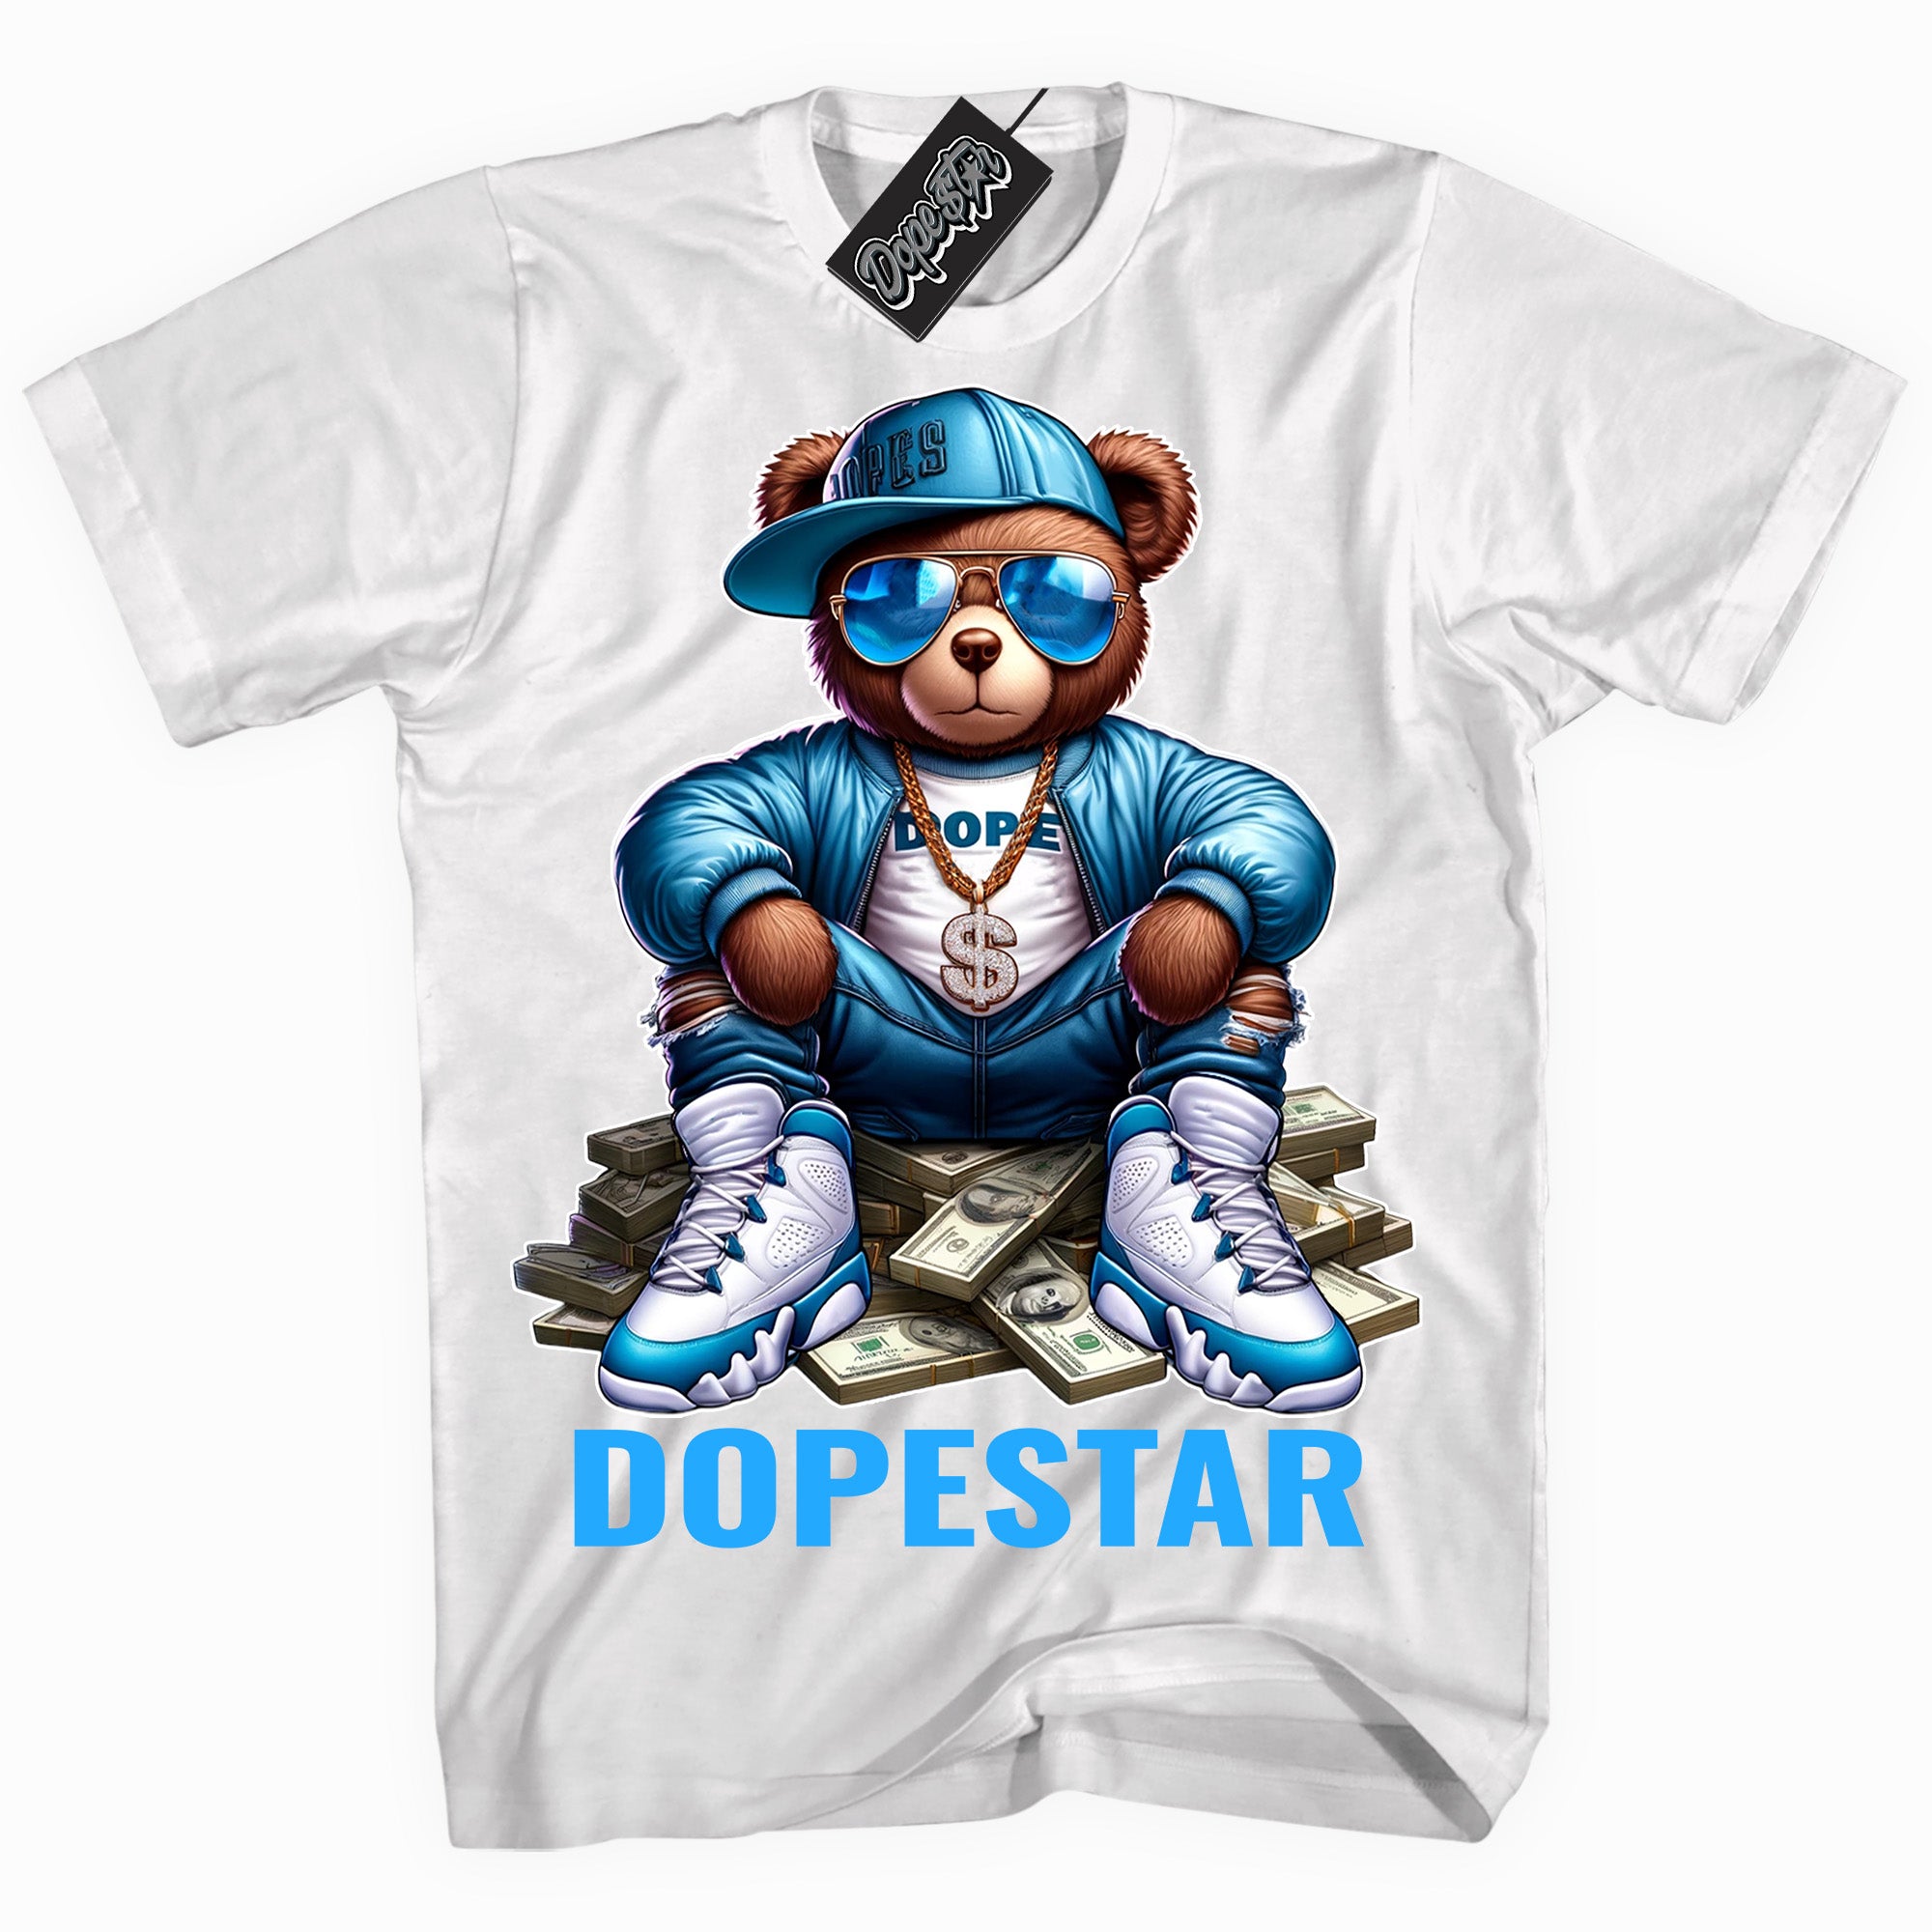 Cool White graphic tee with “ Dope Bear ” design, that perfectly matches Powder Blue 9s sneakers